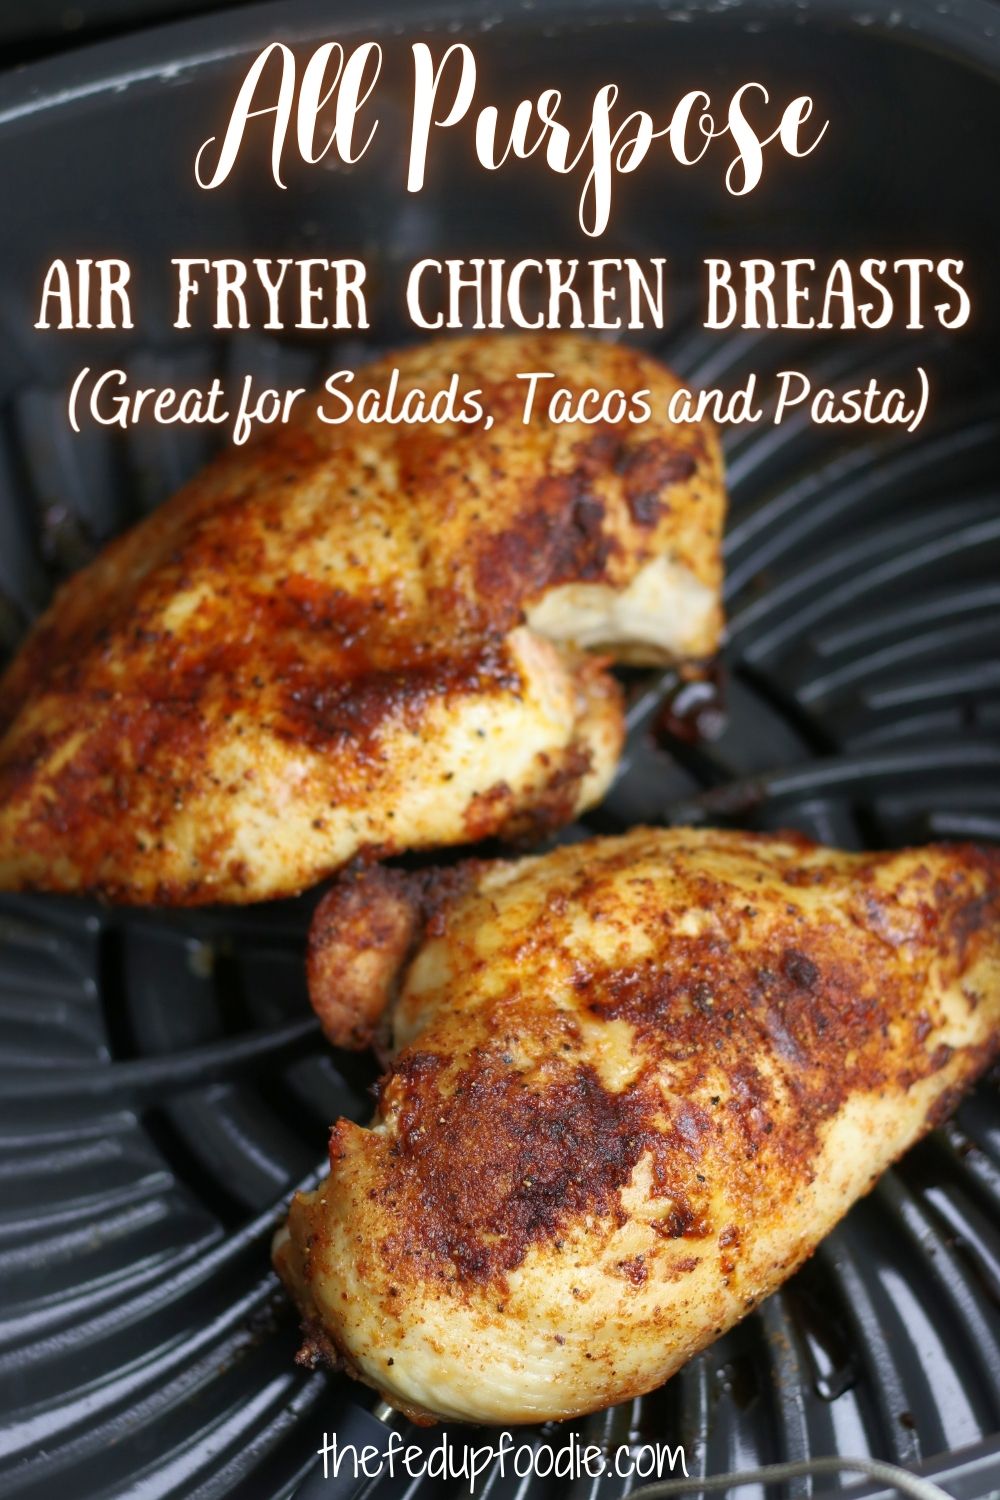 These all purpose Air Fryer Boneless Chicken Breasts are incredibly easy to make and work perfectly for all kinds of meals because they are juicy and flavorful. Make a batch and use for salads, casseroles, sandwiches, etc. 
#AirFryerBonelessChickenBreast #BonelessSkinlessChickenBreastInAirFryer #EasyJuicyAirFryerBonelessChickenBreast #BestAirFryerChickenBreast #JuicyChickenBreastAirFryer